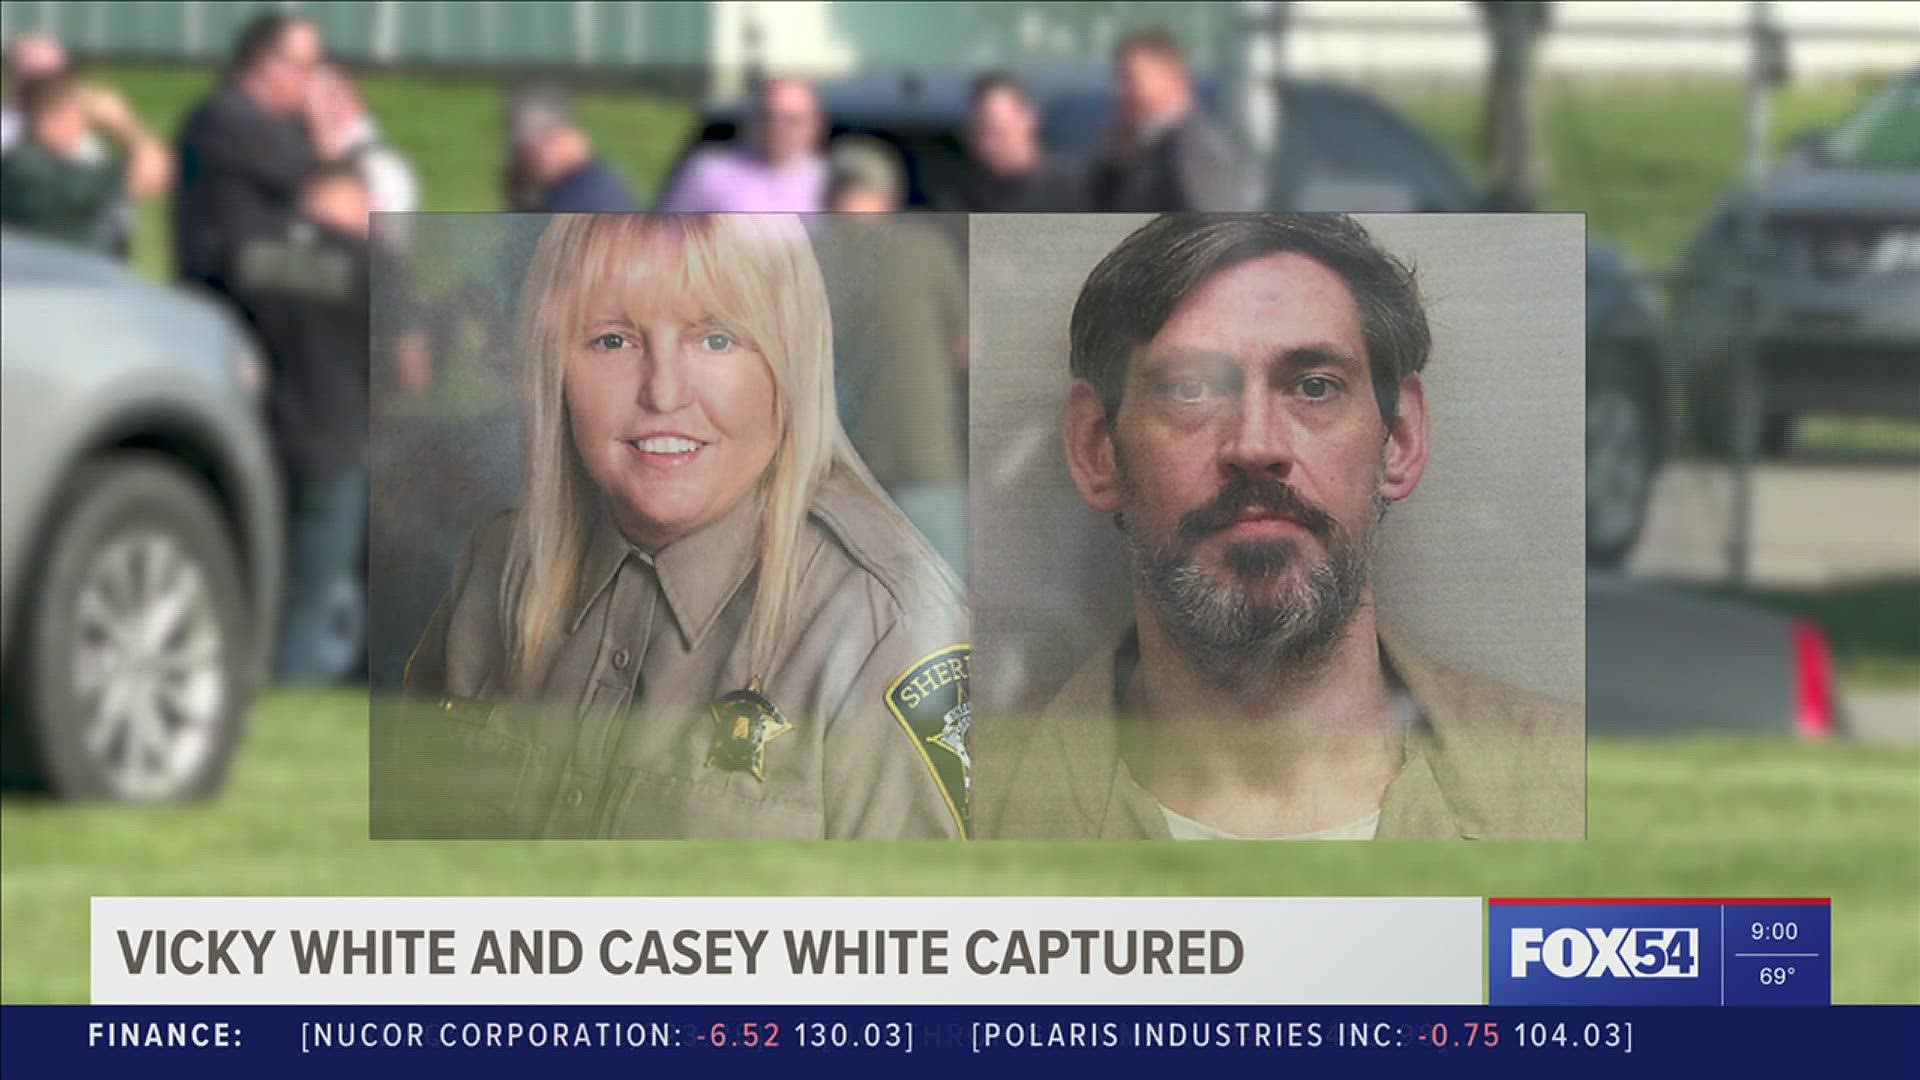 Vicky White and Casey White were captured together in Indiana.